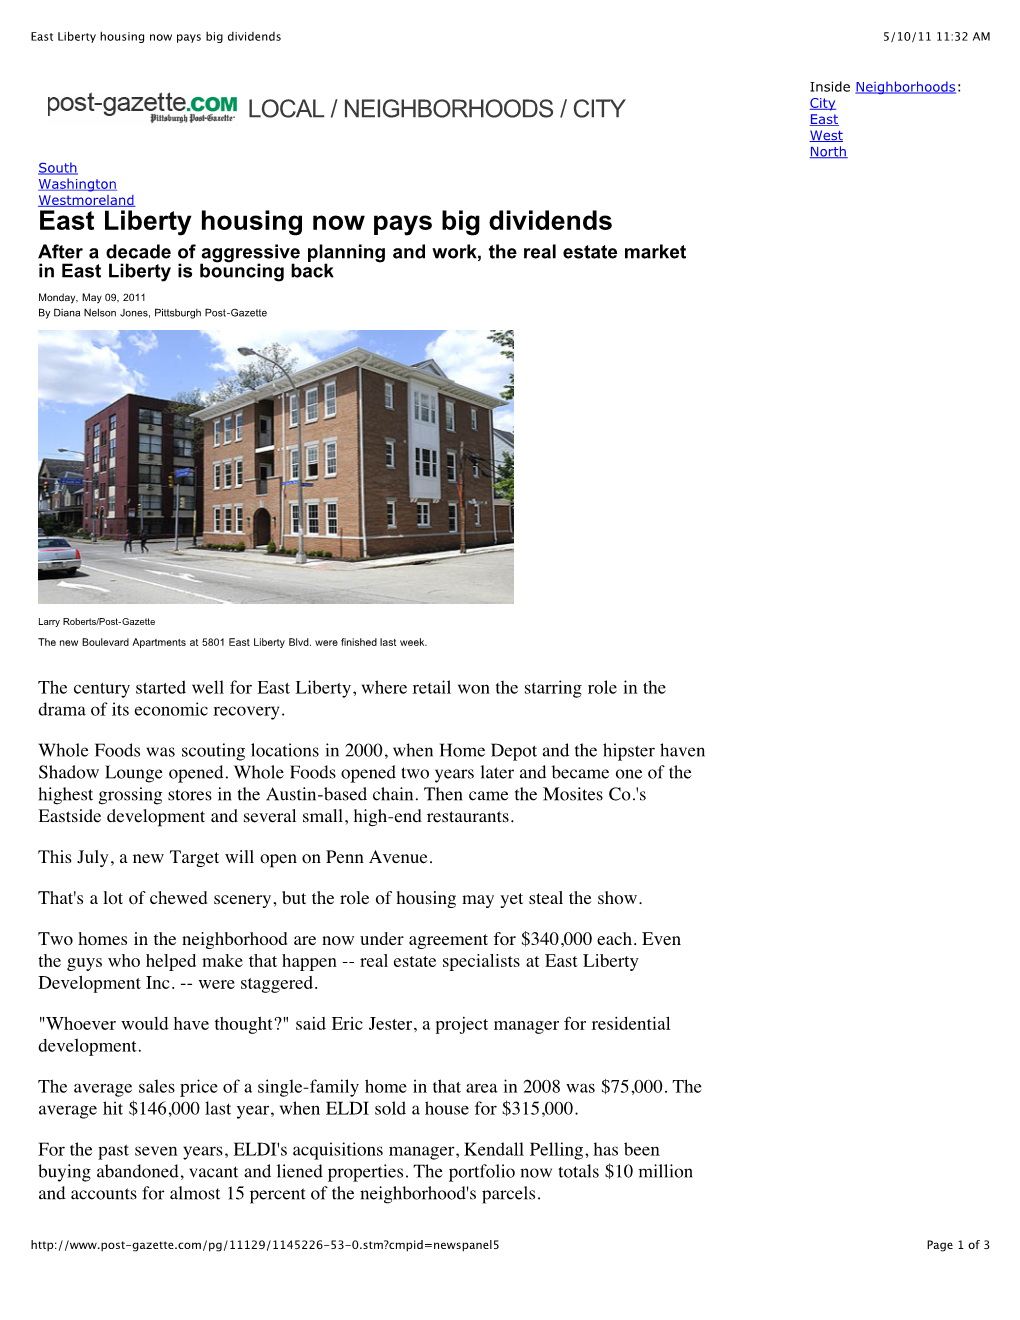 East Liberty Housing Now Pays Big Dividends 5/10/11 11:32 AM